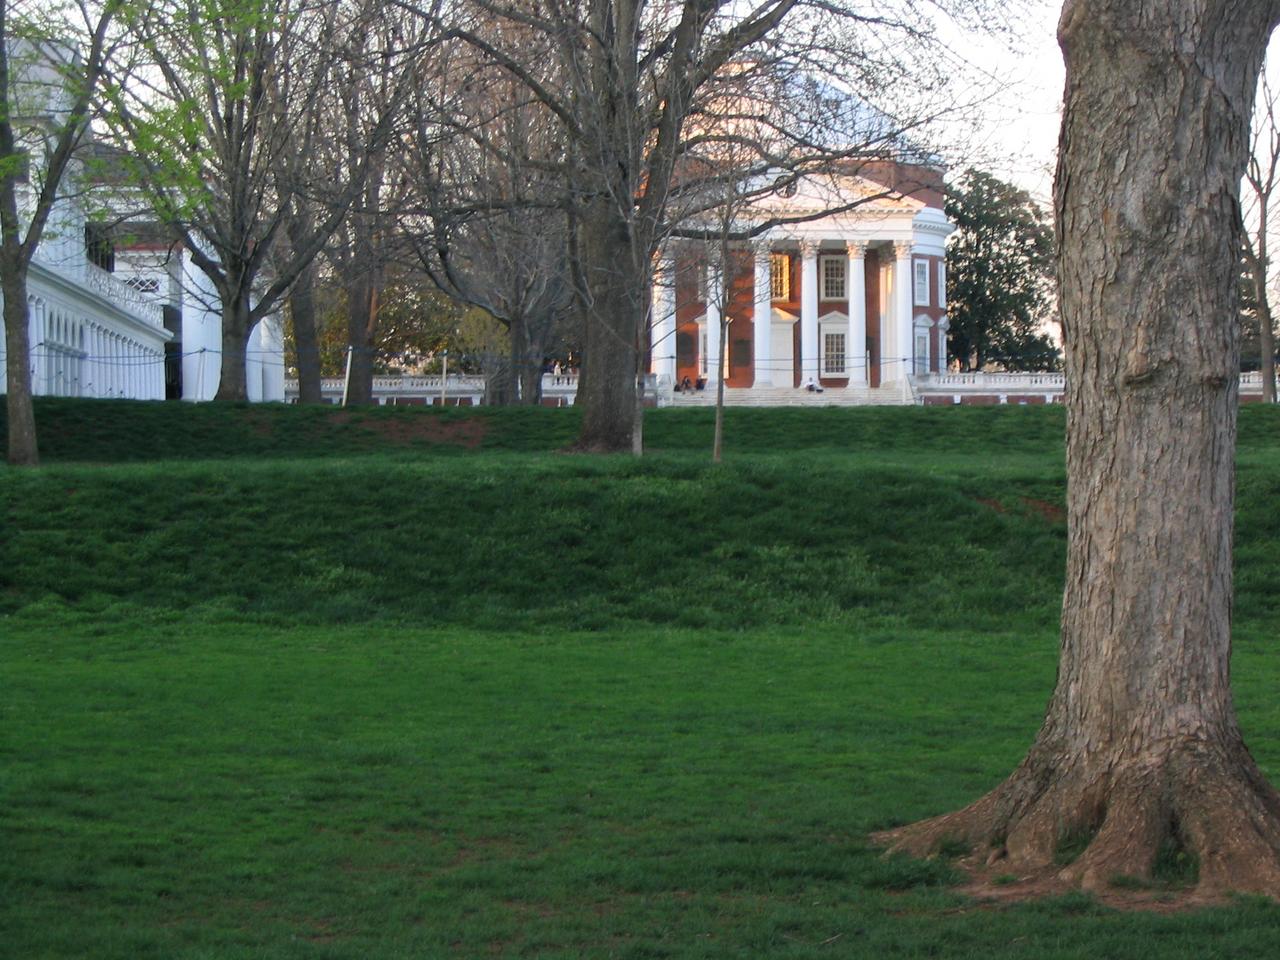 Looking up the Lawn to the Rotunda